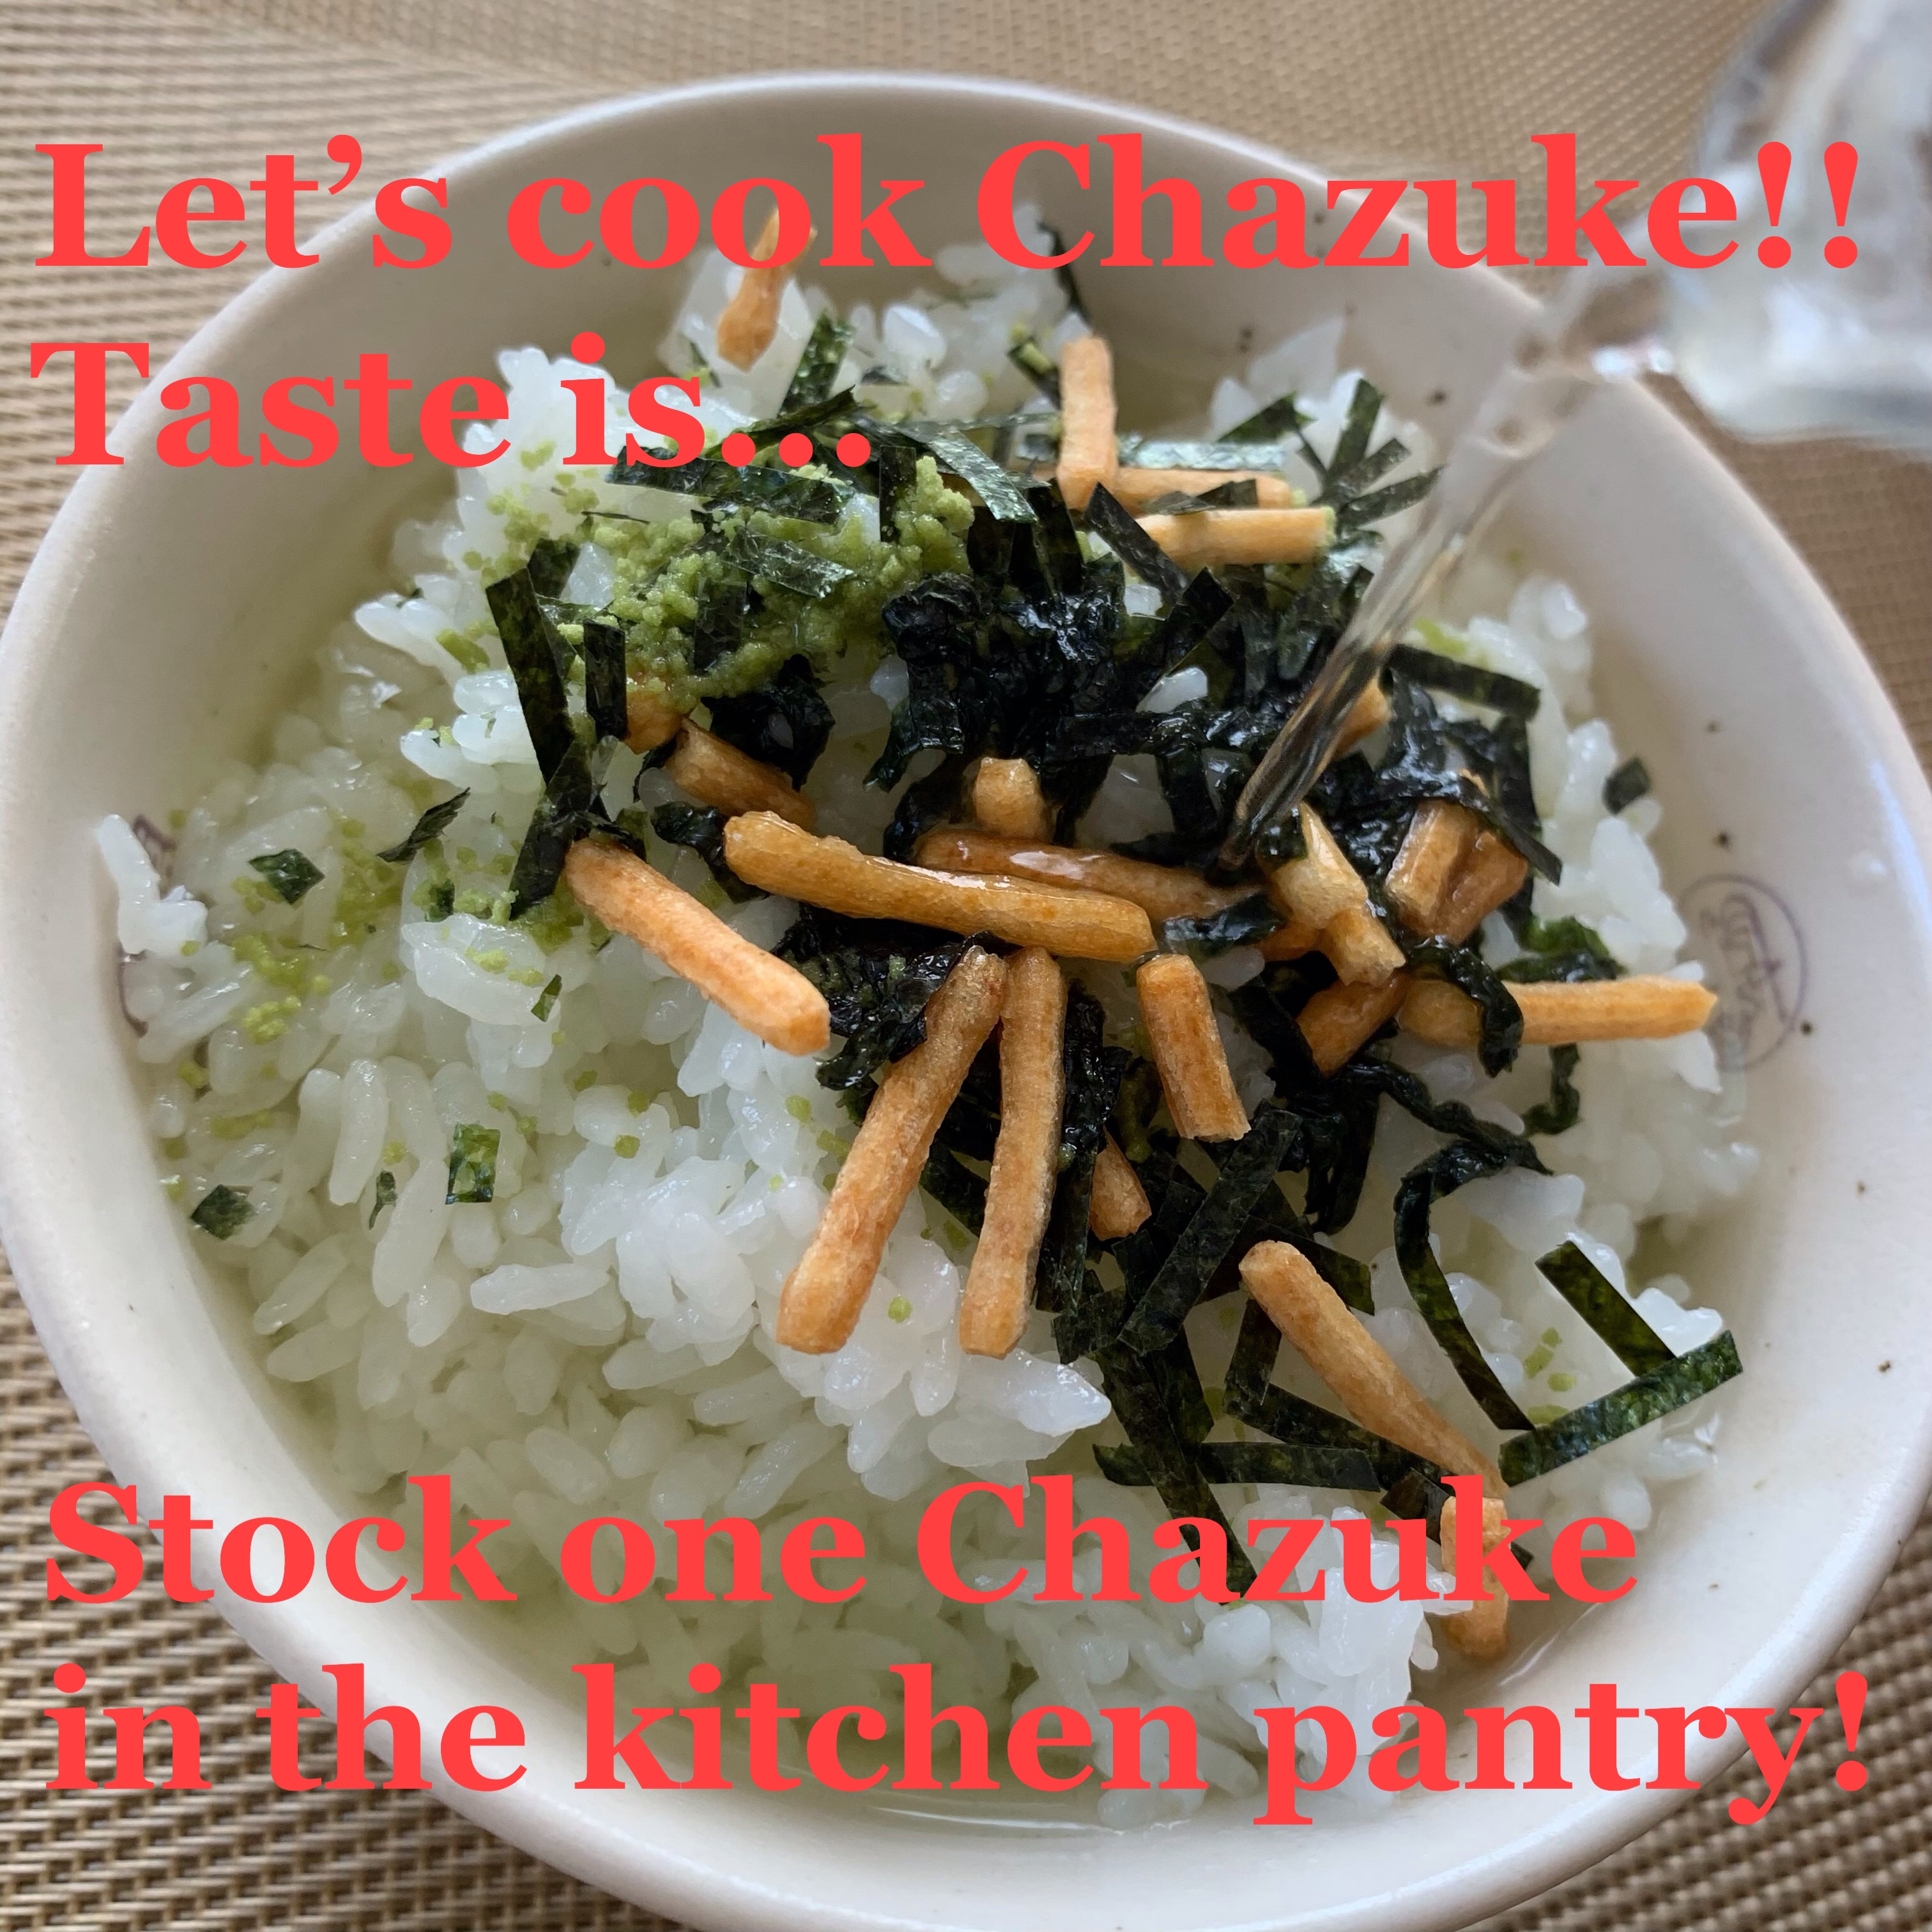 ●Let ’s cook a Chazuke !! Taste is... stock one Chazuke in the kitchen pantry!